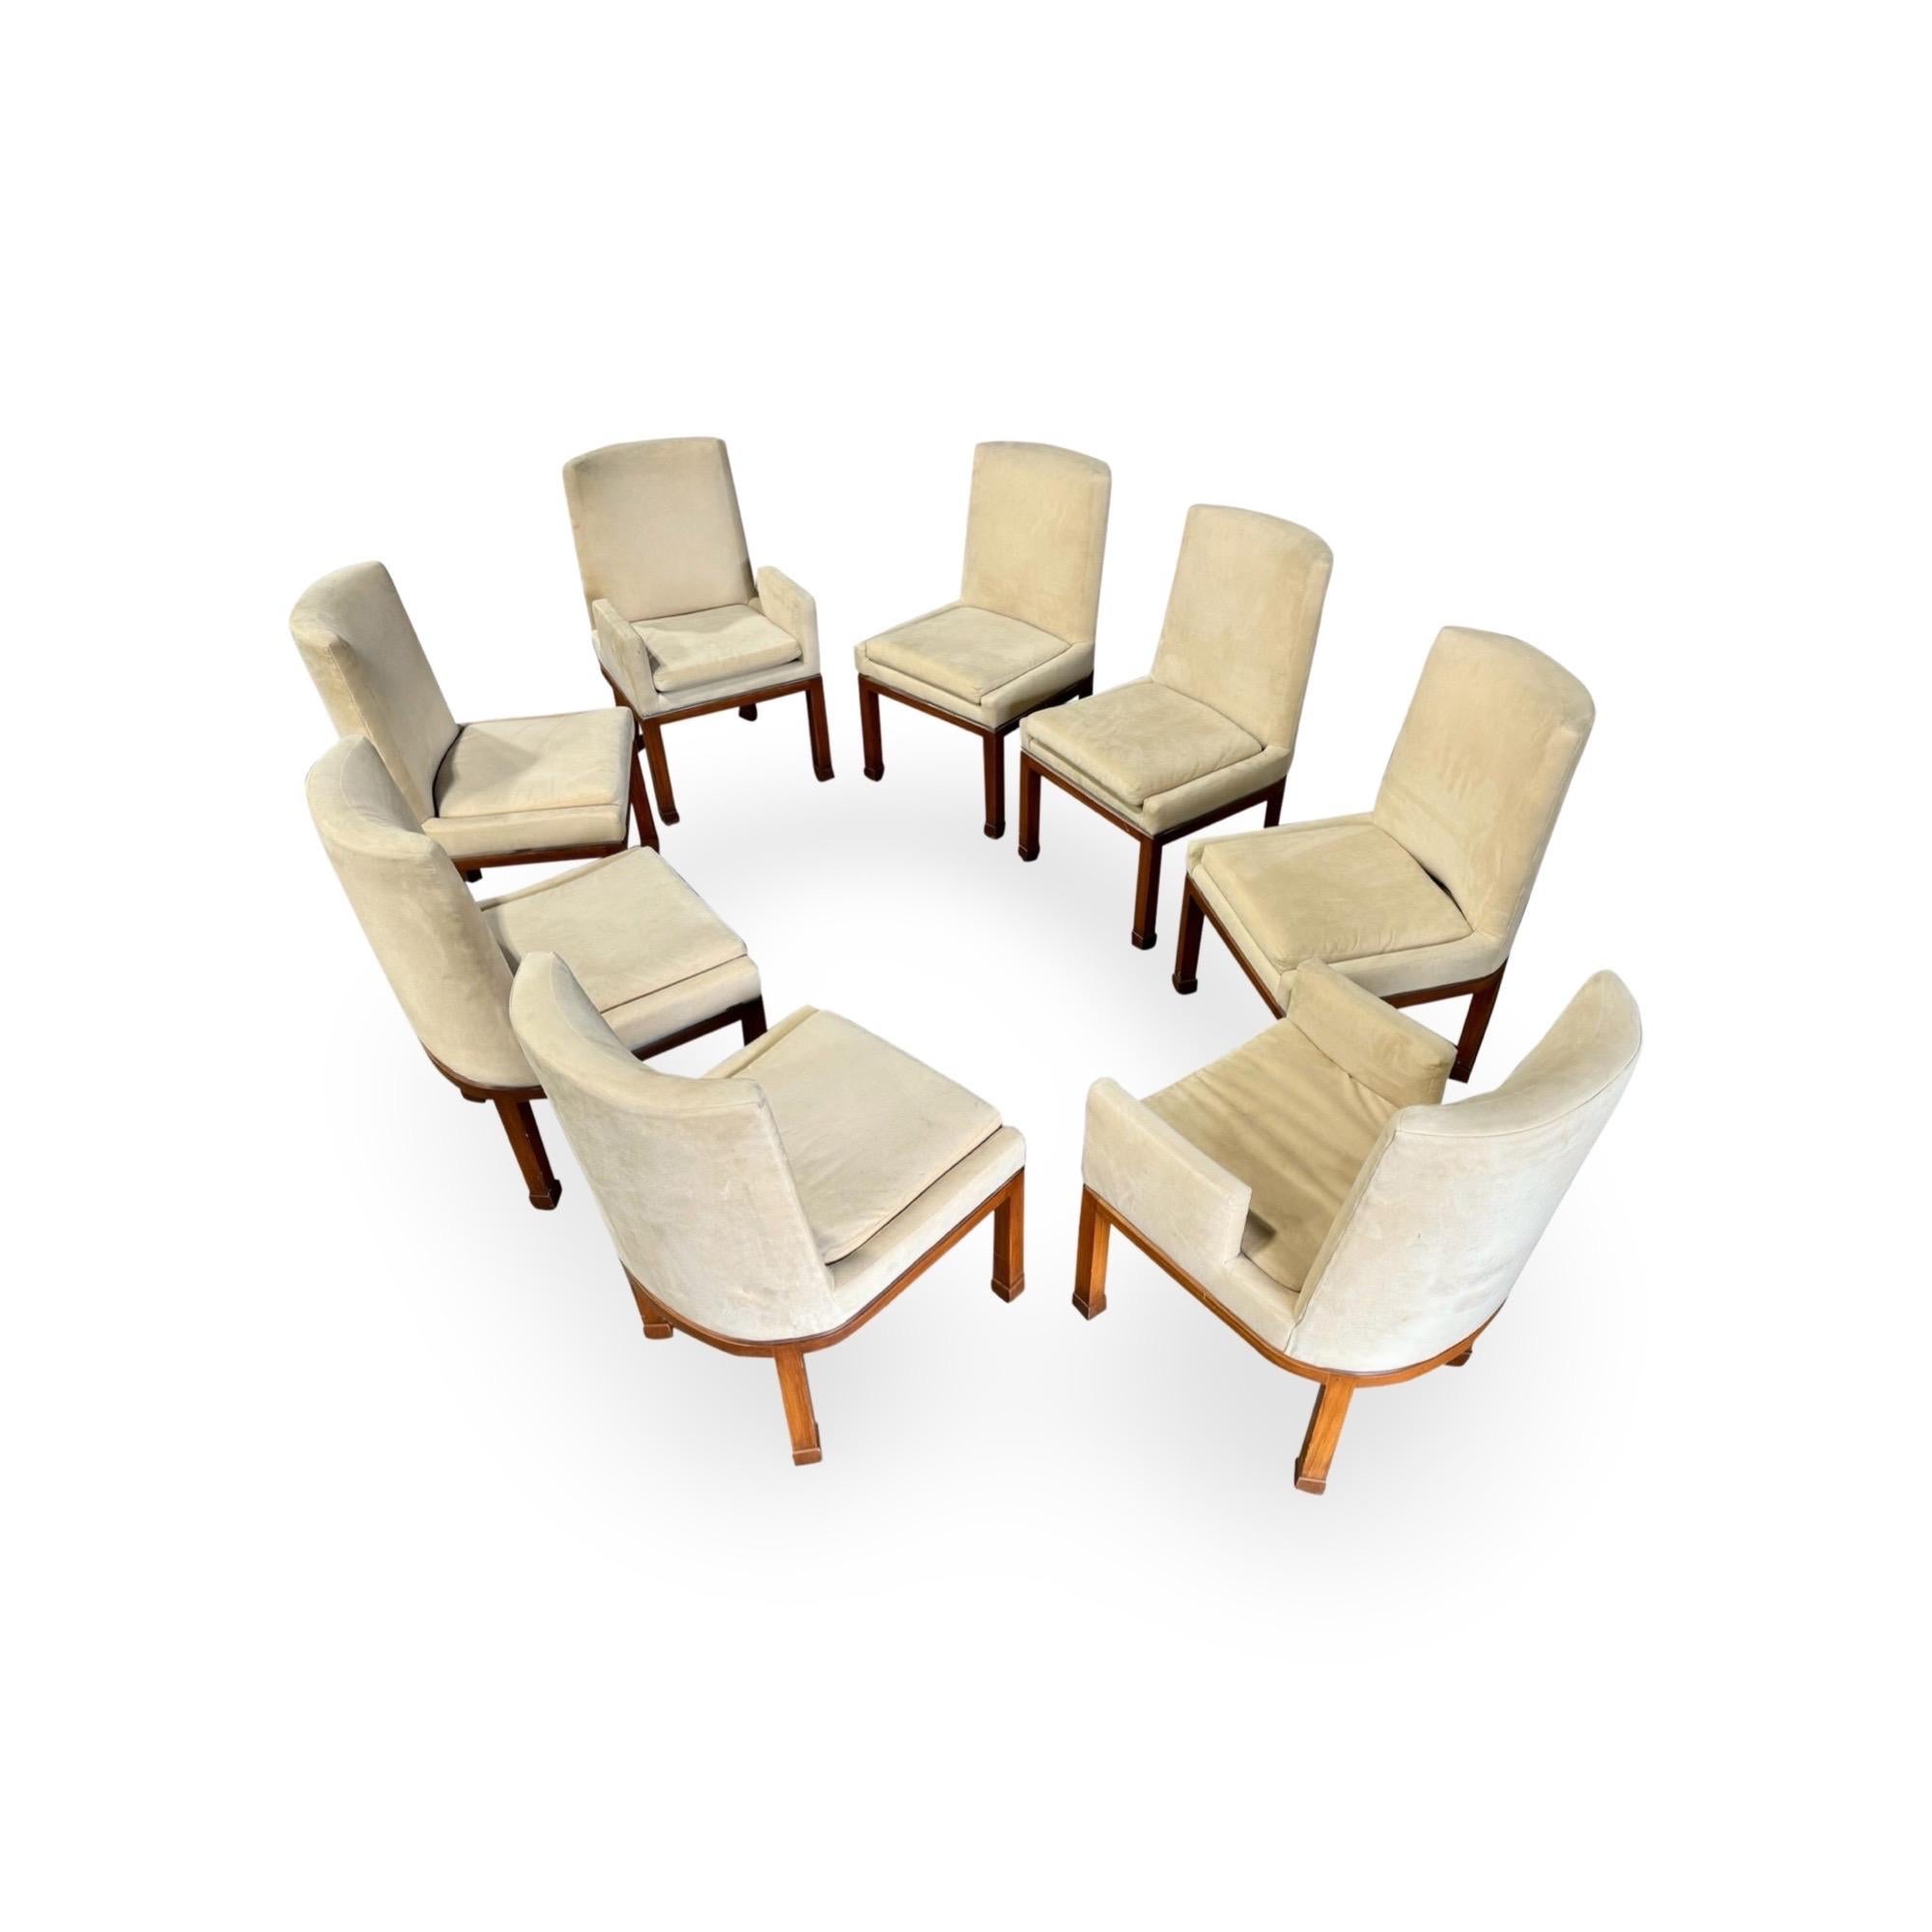 North American Vladimir Kagan Vintage Signed Dining Chairs, Set Of Eight c. 1970s For Sale